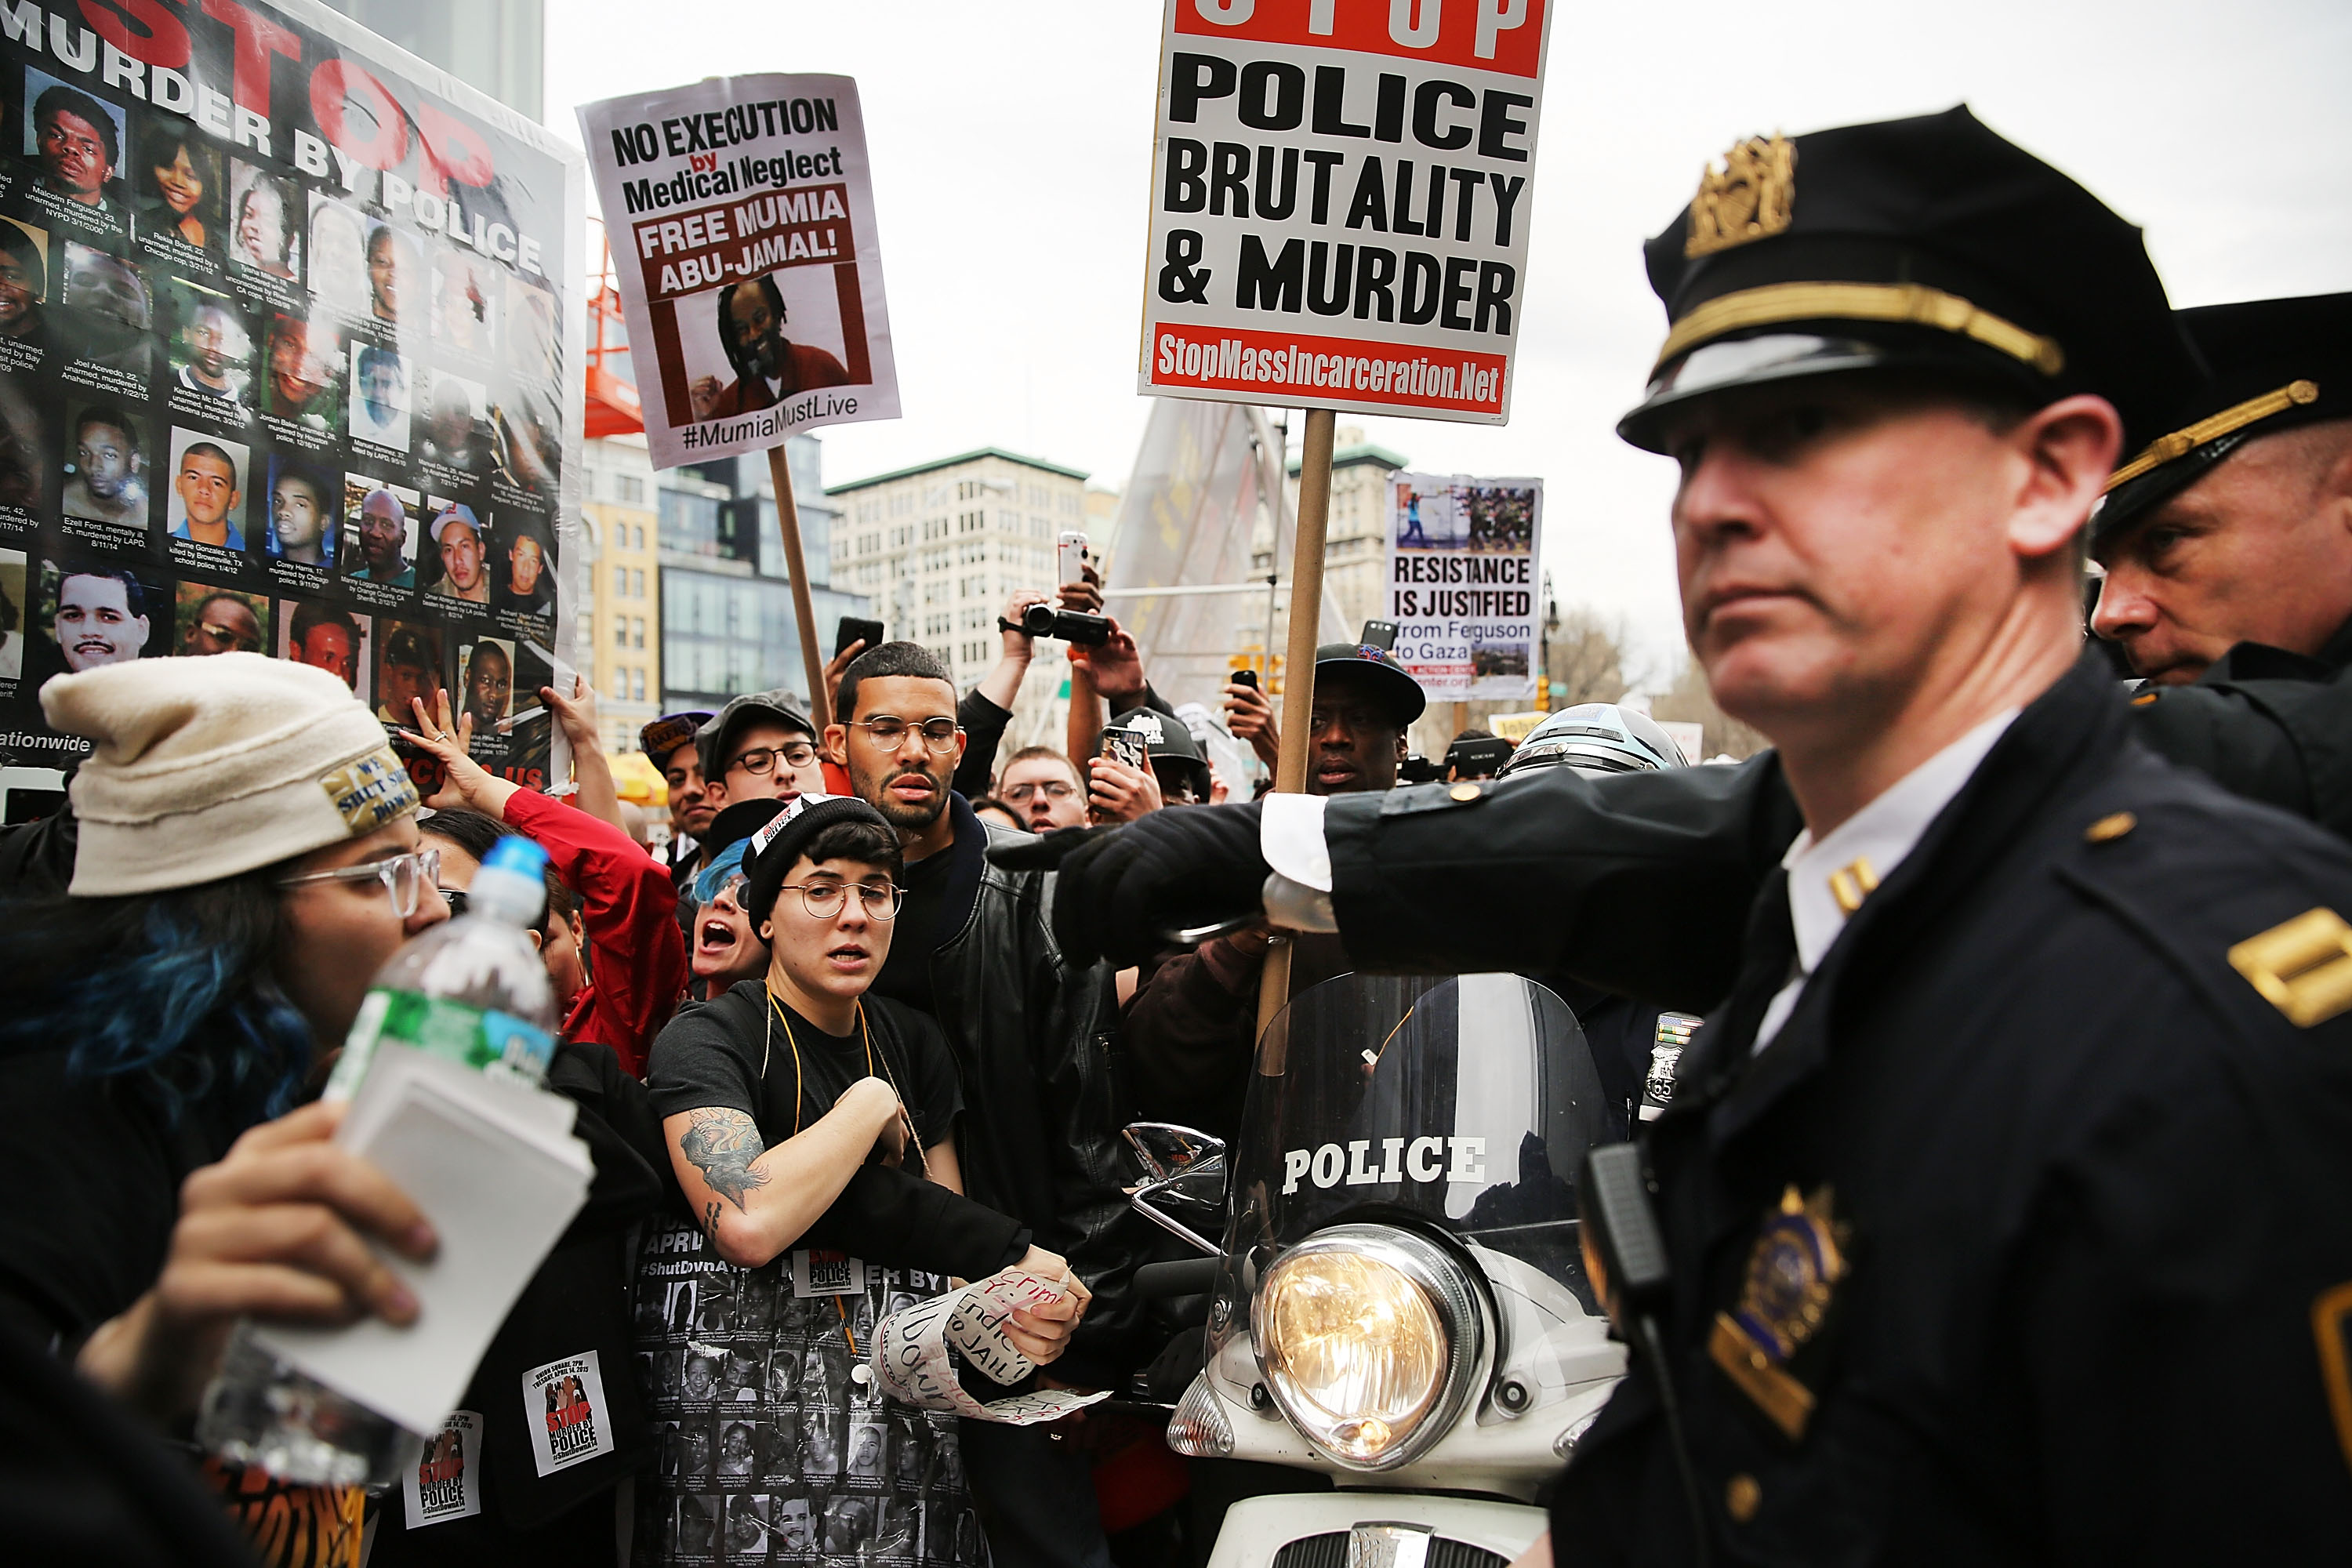 Protesters scuffle with police during a march against police violence in Manhattan on April 14, 2015 